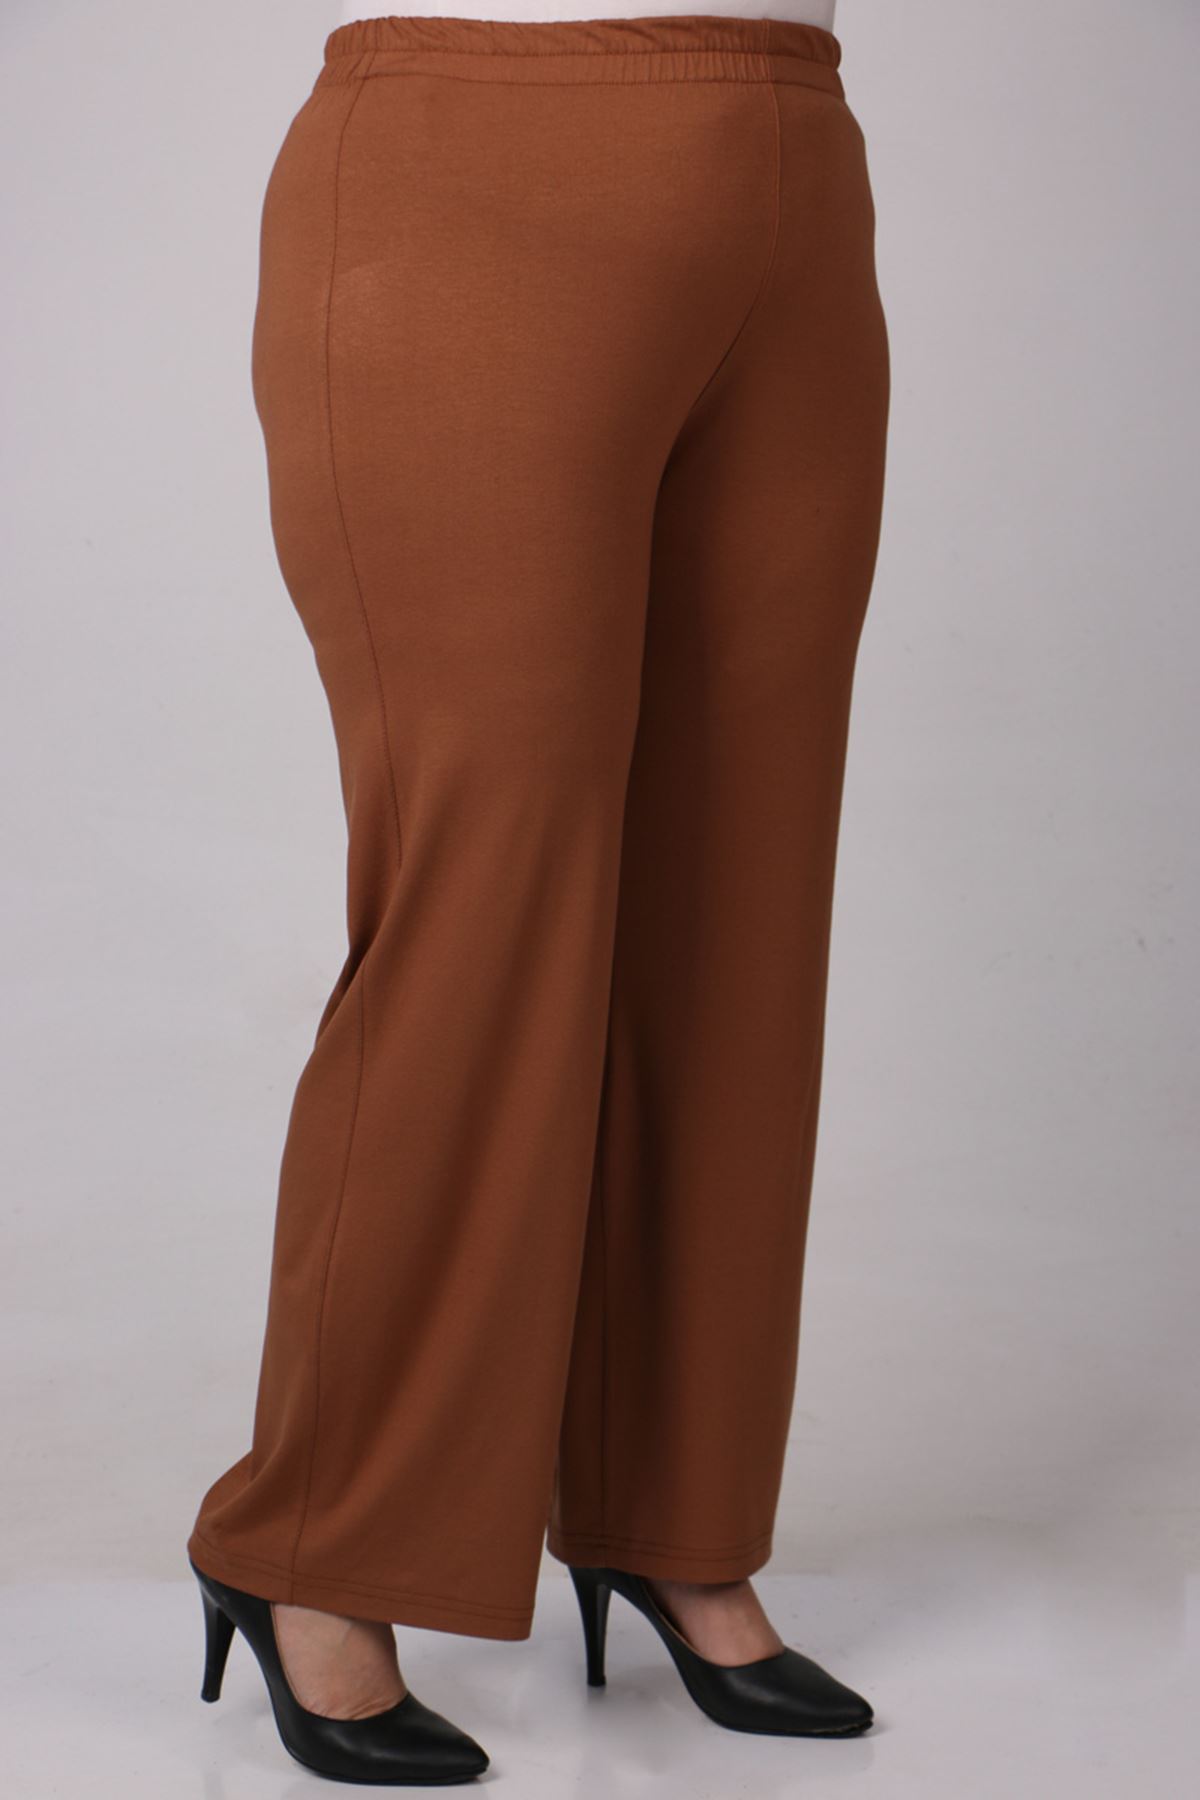 37003 Large Size Sequined Combed Combed Pants Suit-Brown